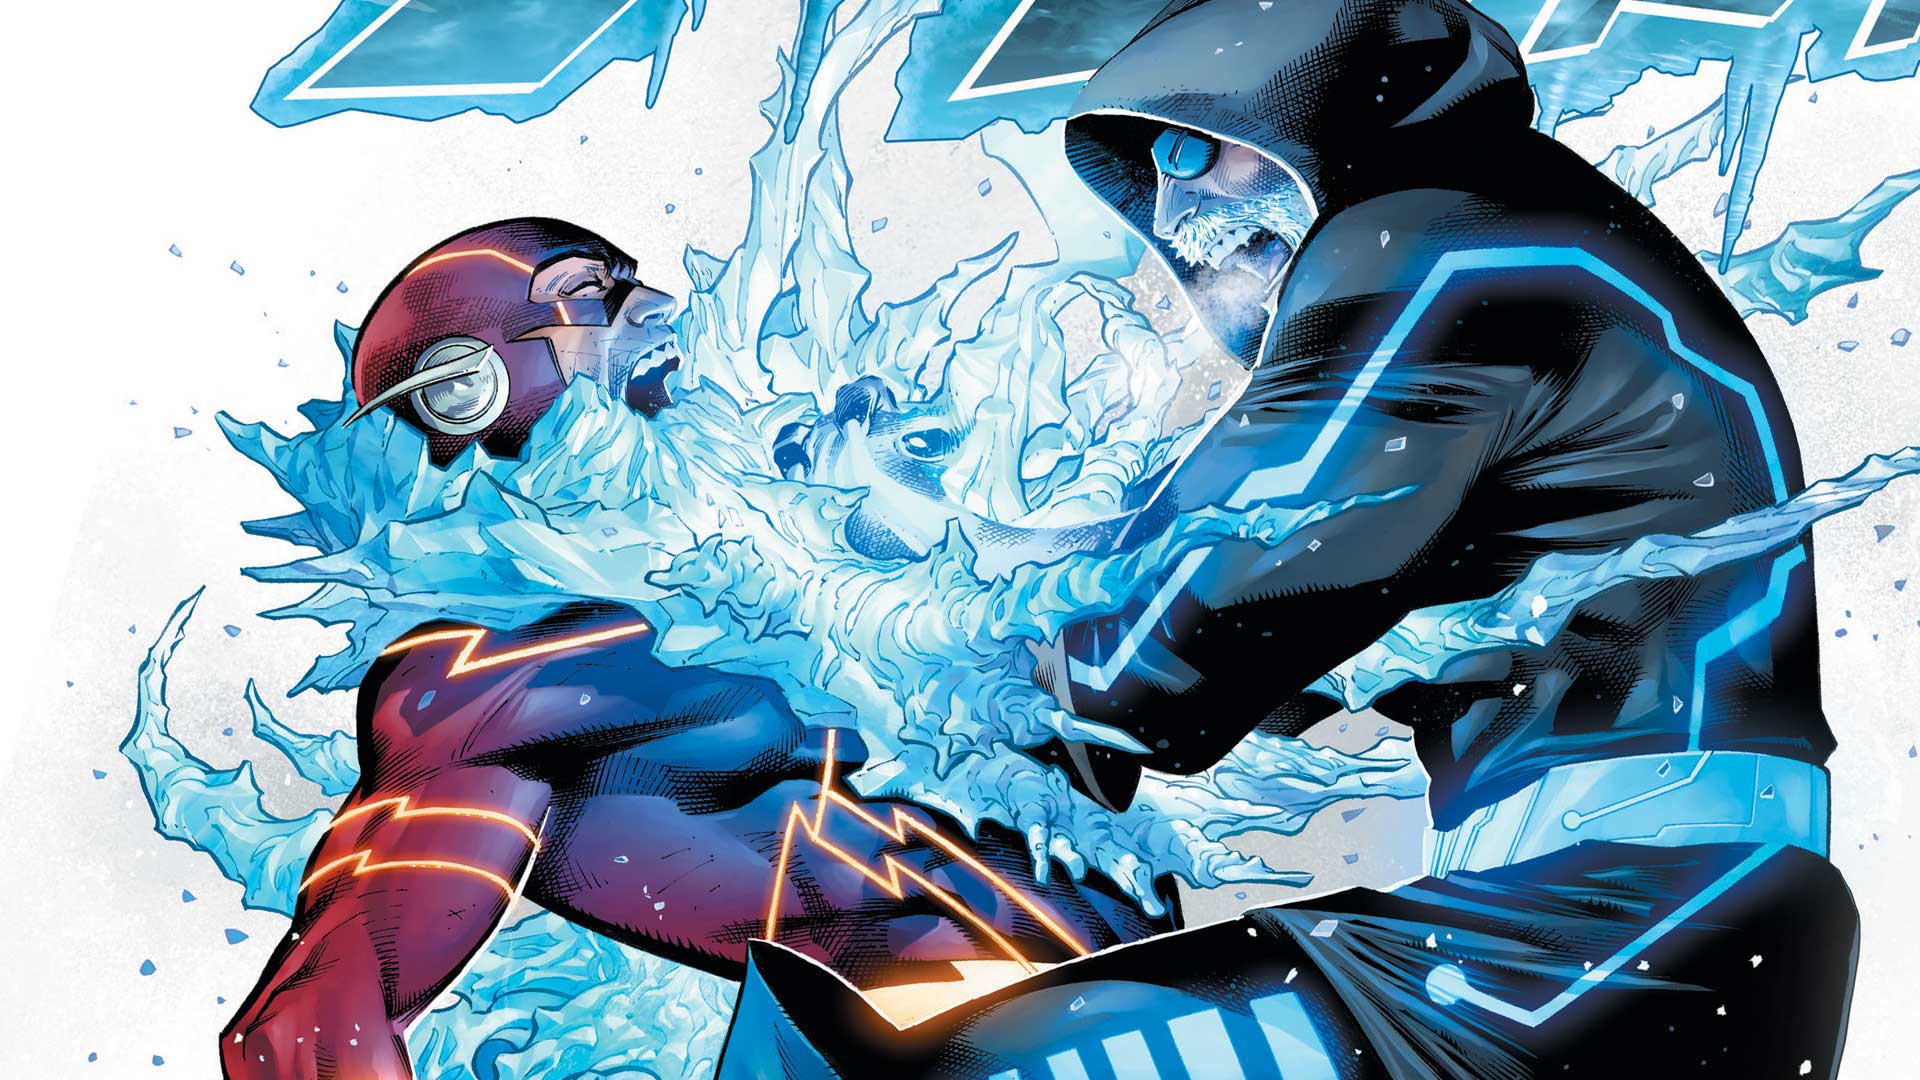 THE FLASH IS BACK TO ALERT “THE DEATH OF SPEED FORCE”